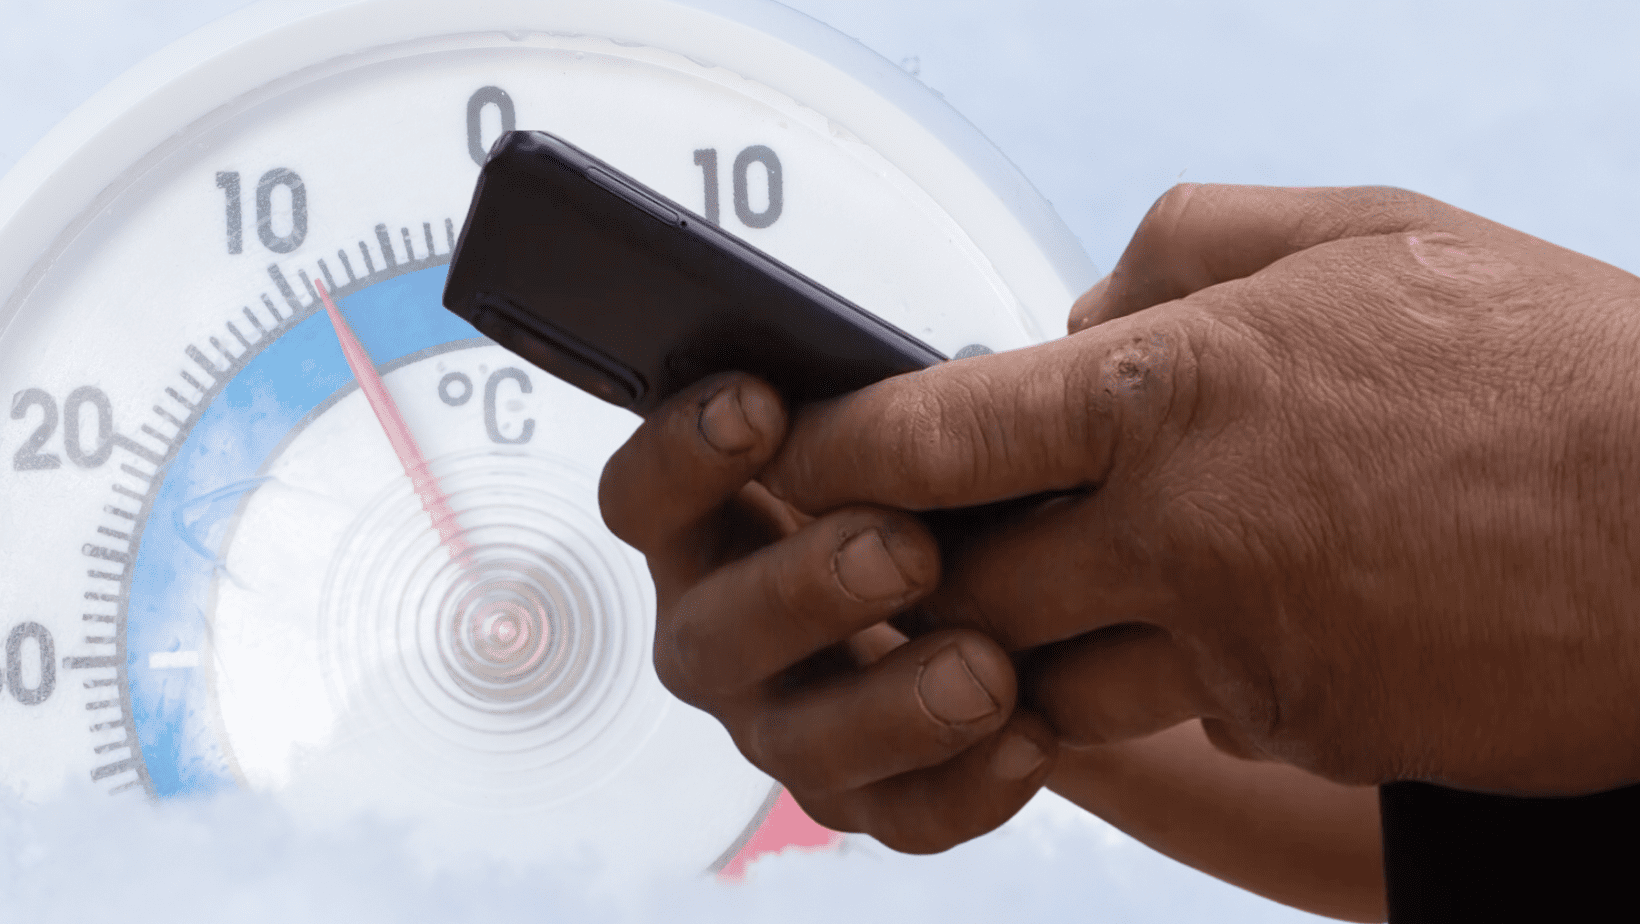 Photo of hands holding cell phone over image of thermometer and ice